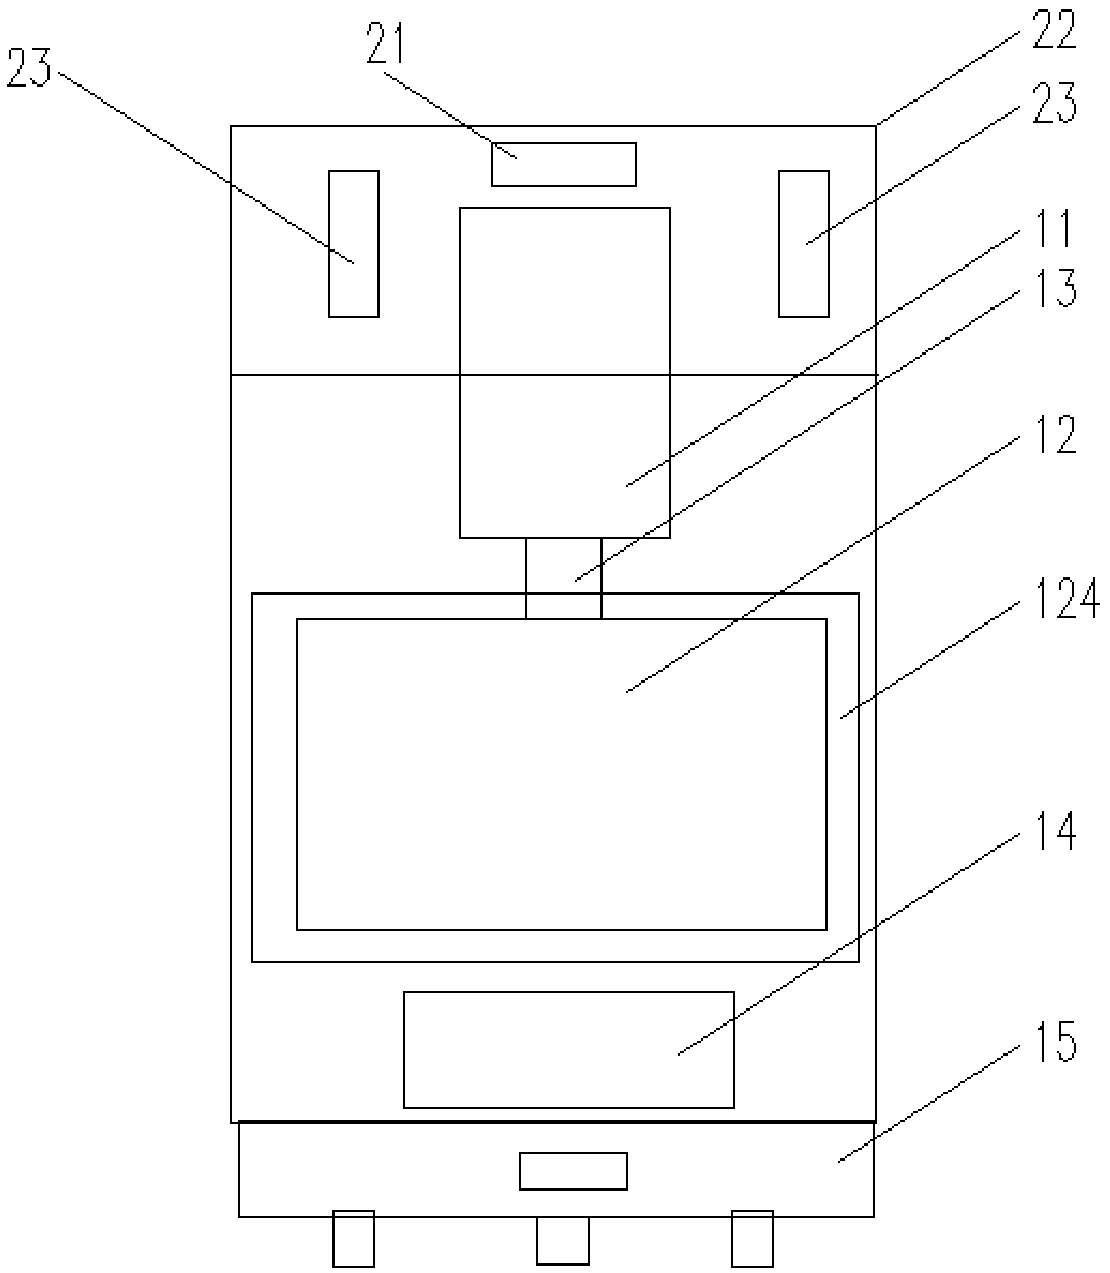 Control method and device used for portable air conditioner